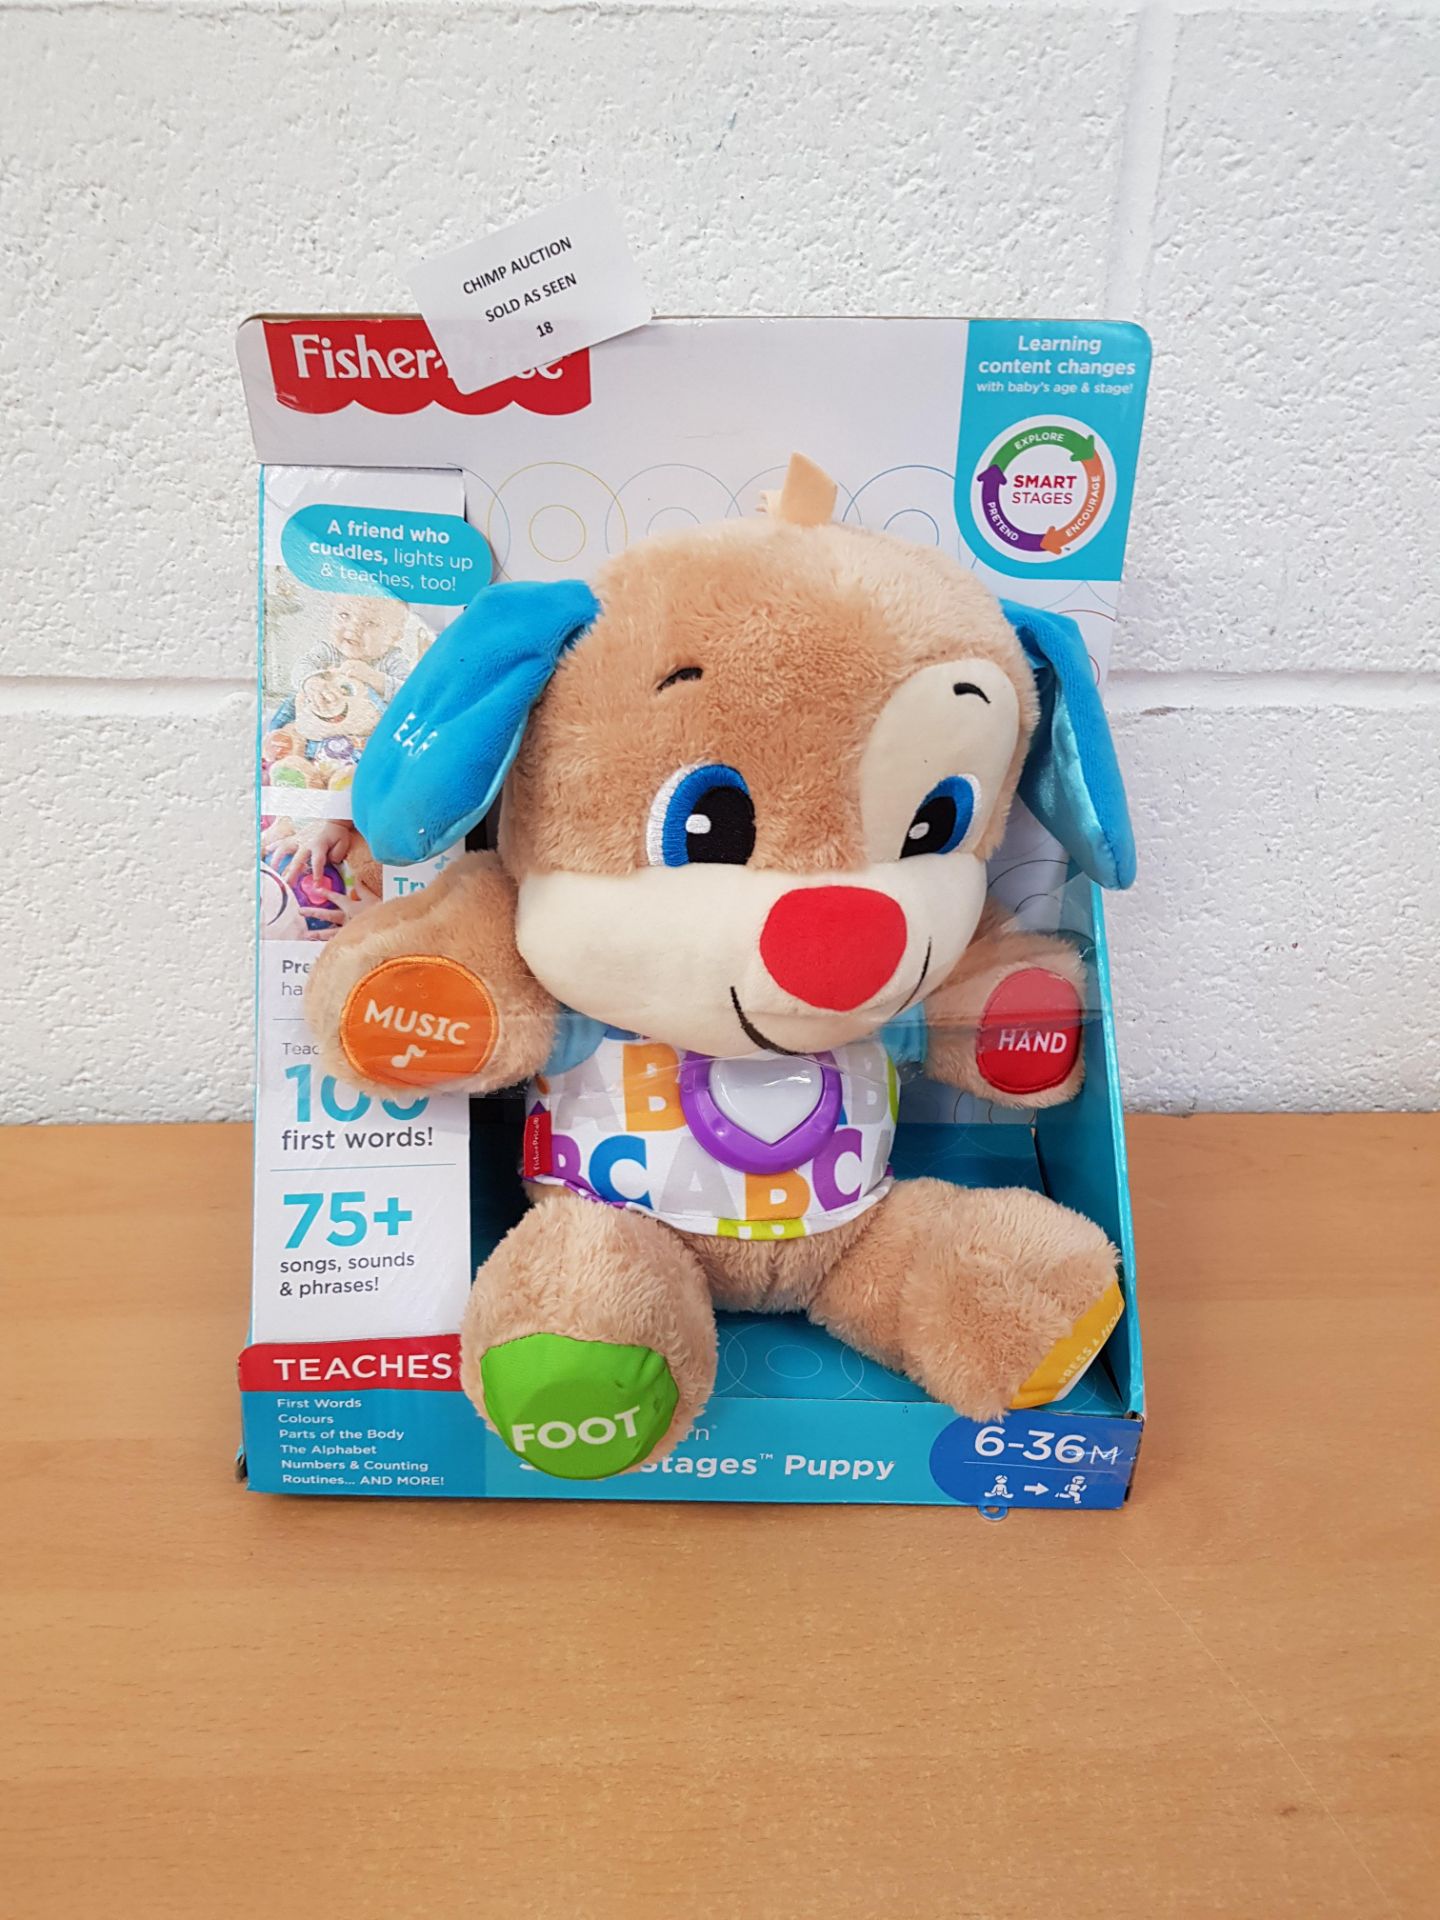 Fisher Price Stages Puppy Interactive Playset